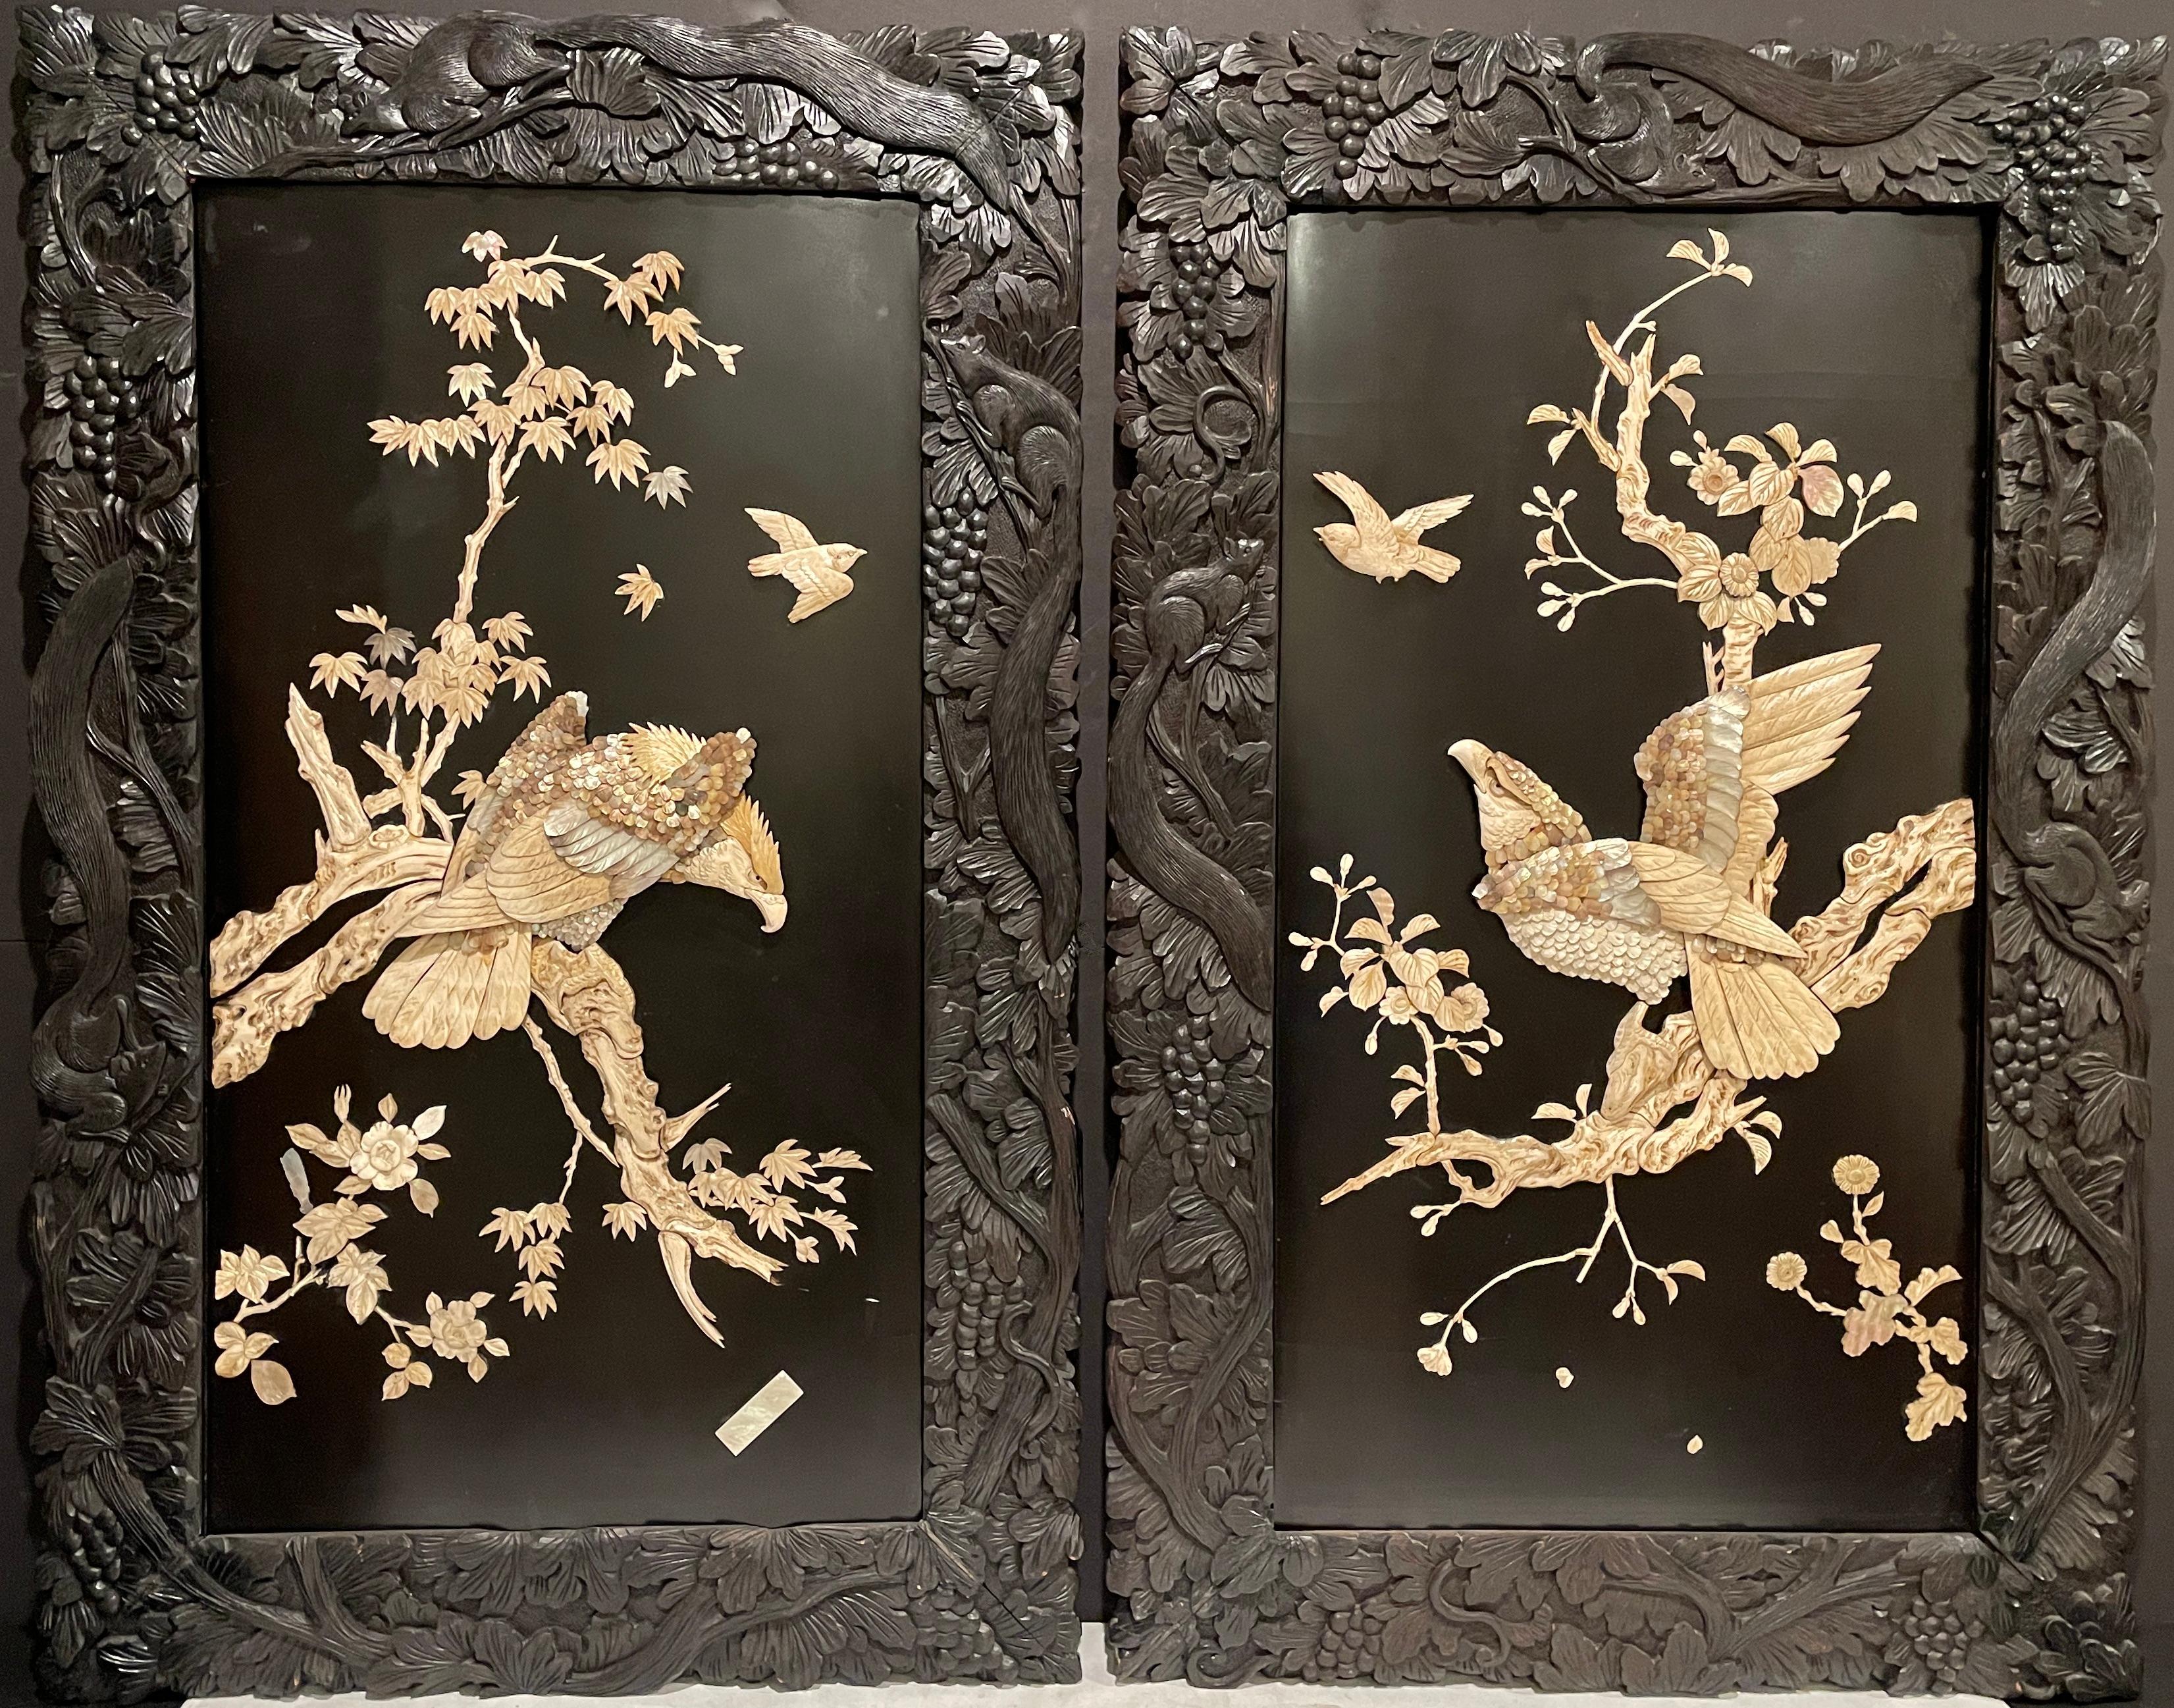 A pair of finest quality Meiji period Japanese carved, inlaid and lacquered hanging panels. Beautifully framed with original carved wood frame featuring squirrels climbing through leaves and branches. Panels featuring layered bone and mother